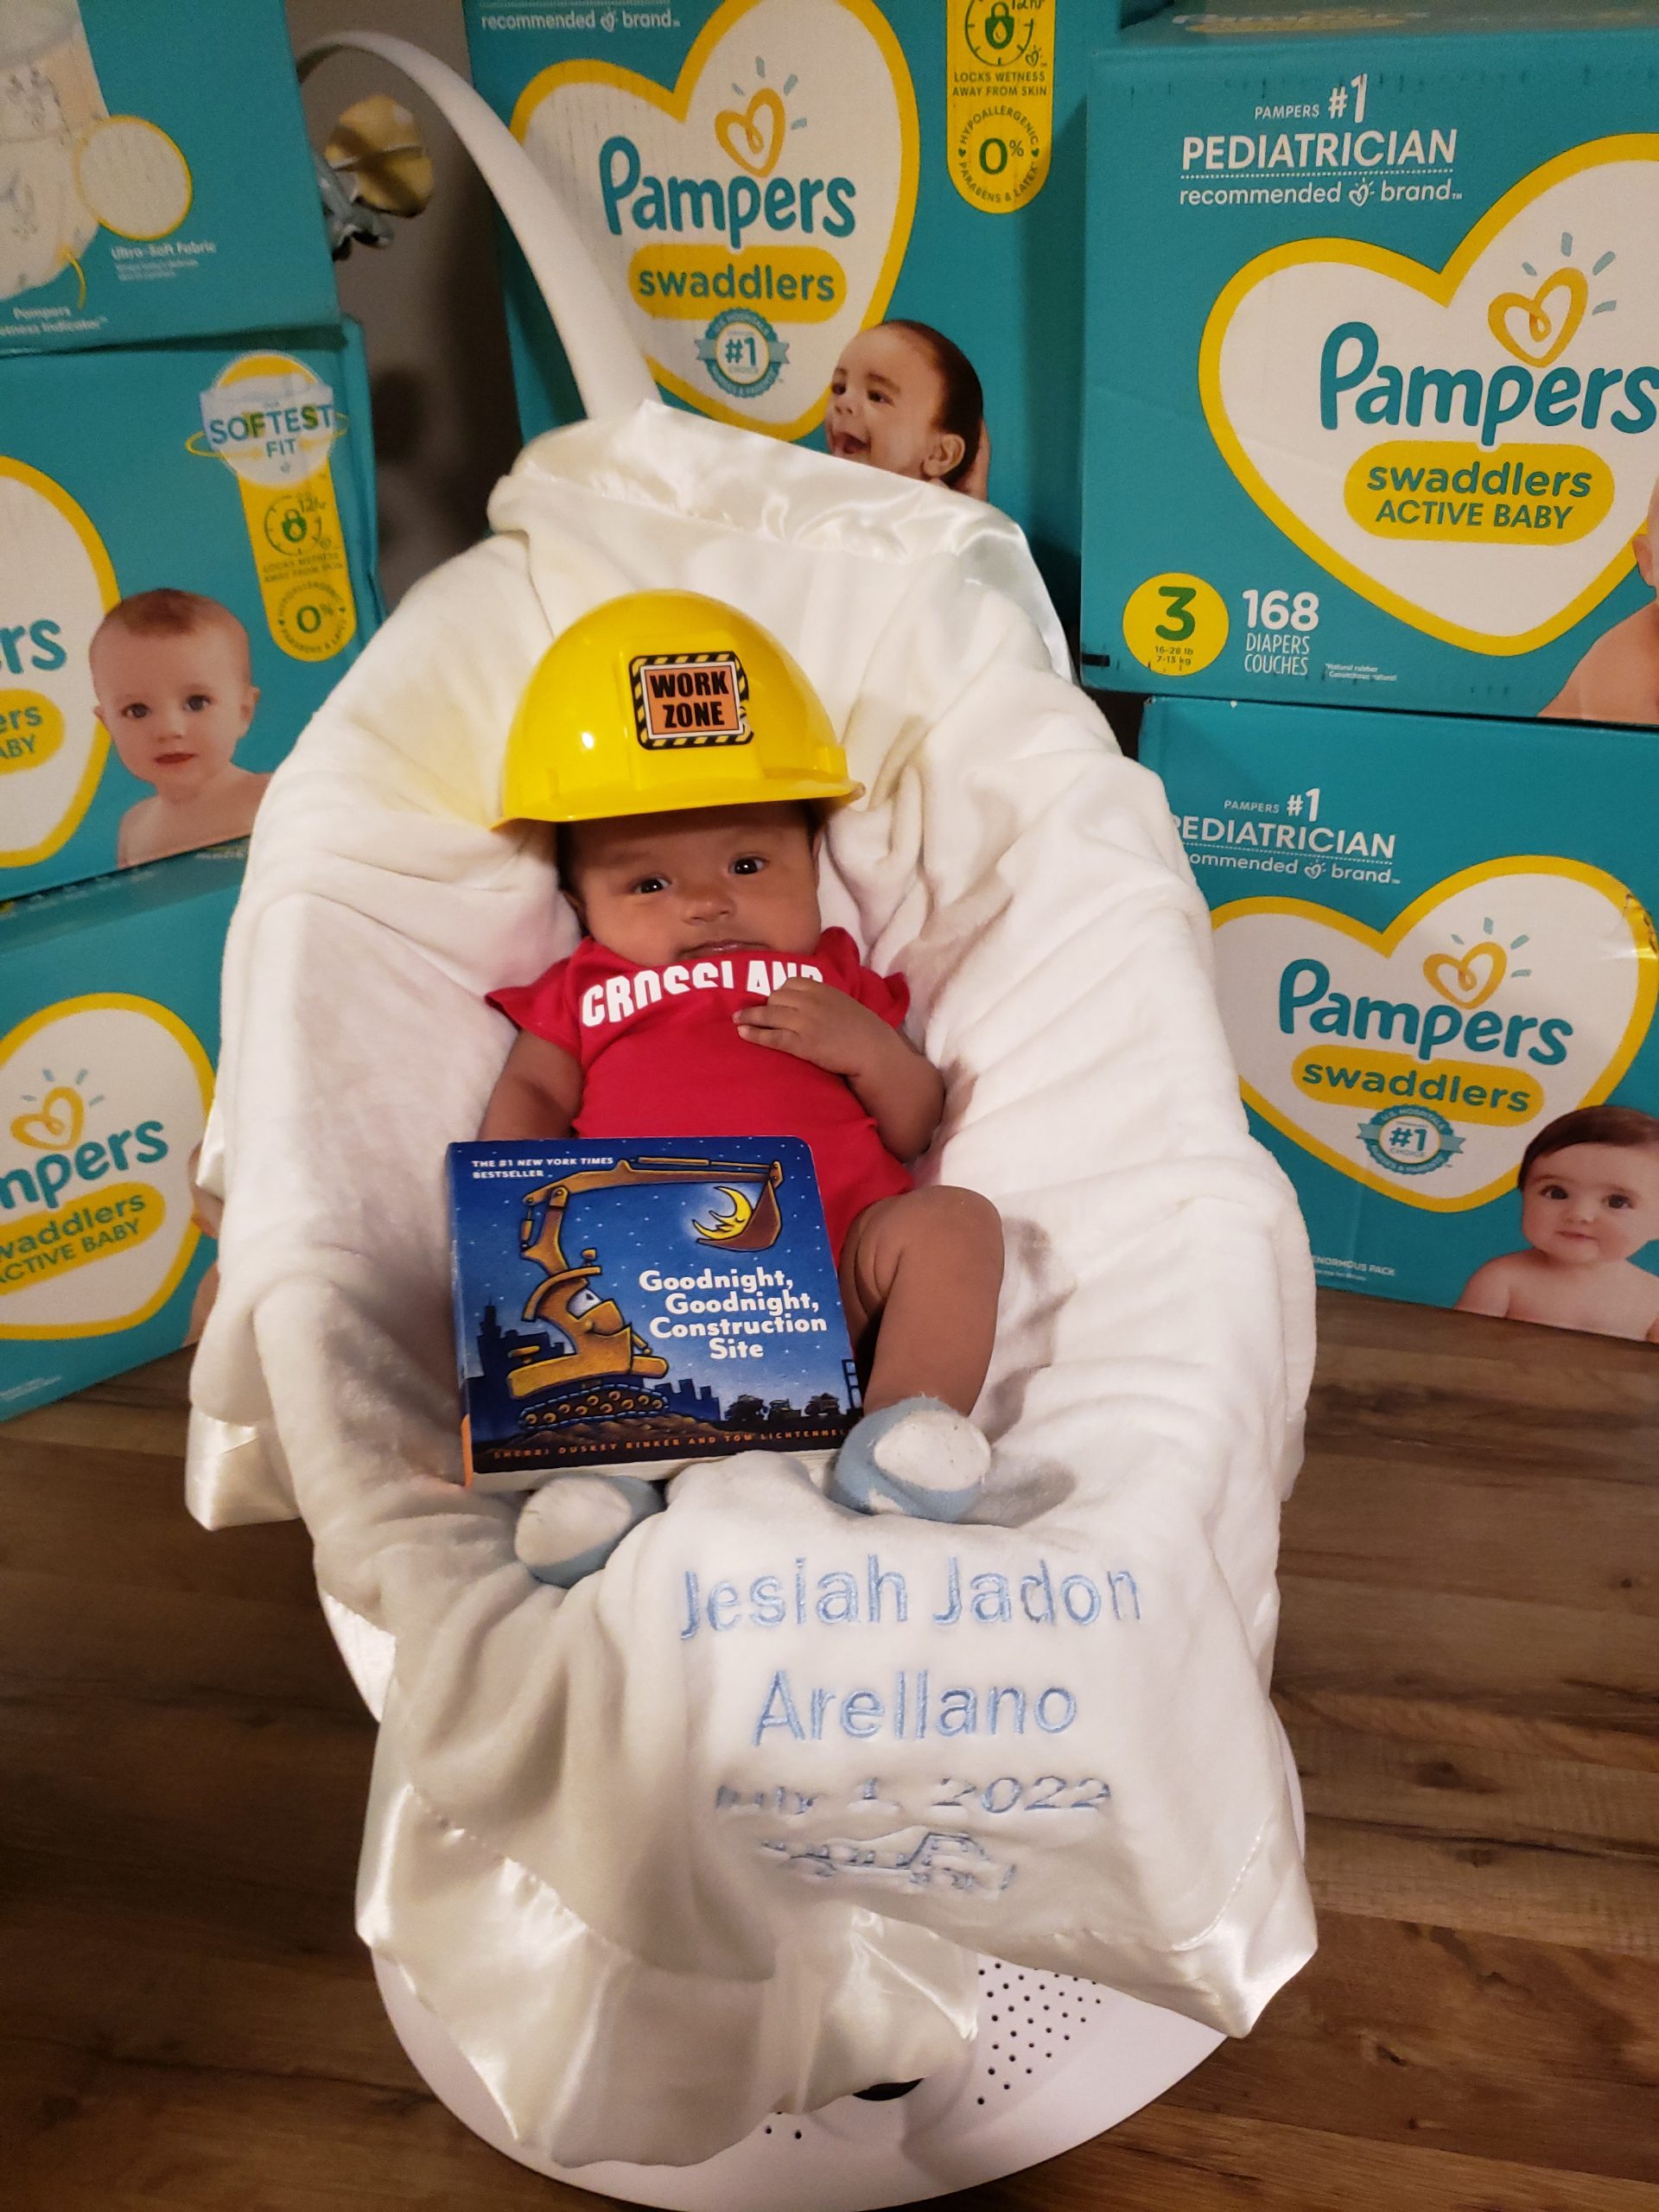 A baby wearing a hard hat in front of boxes of pampers.